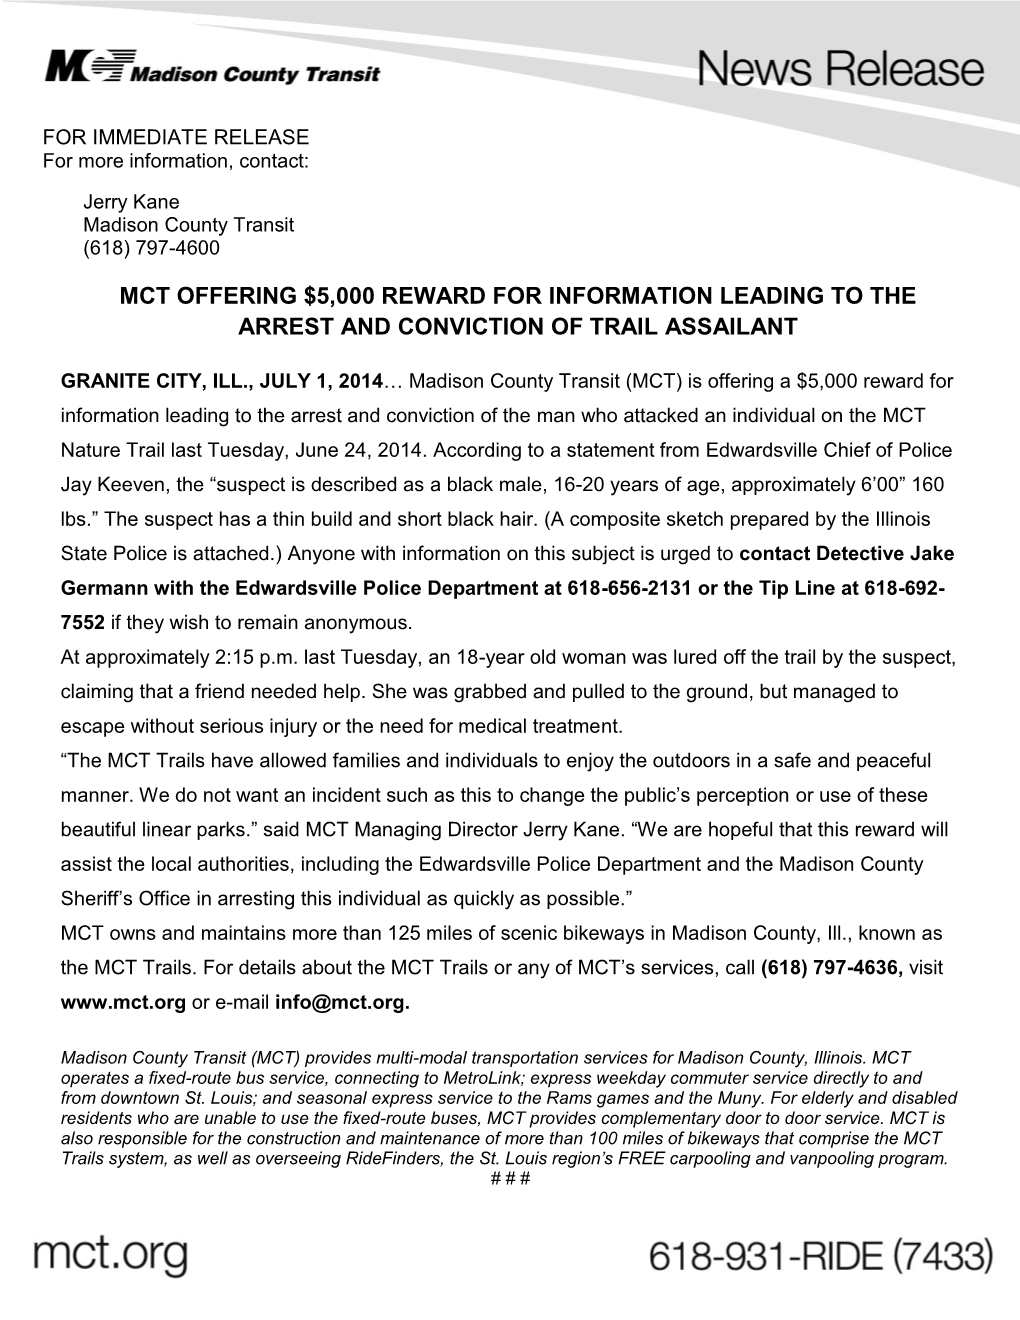 Mct Offering $5,000 Reward for Information Leading to the Arrest and Conviction of Trail Assailant